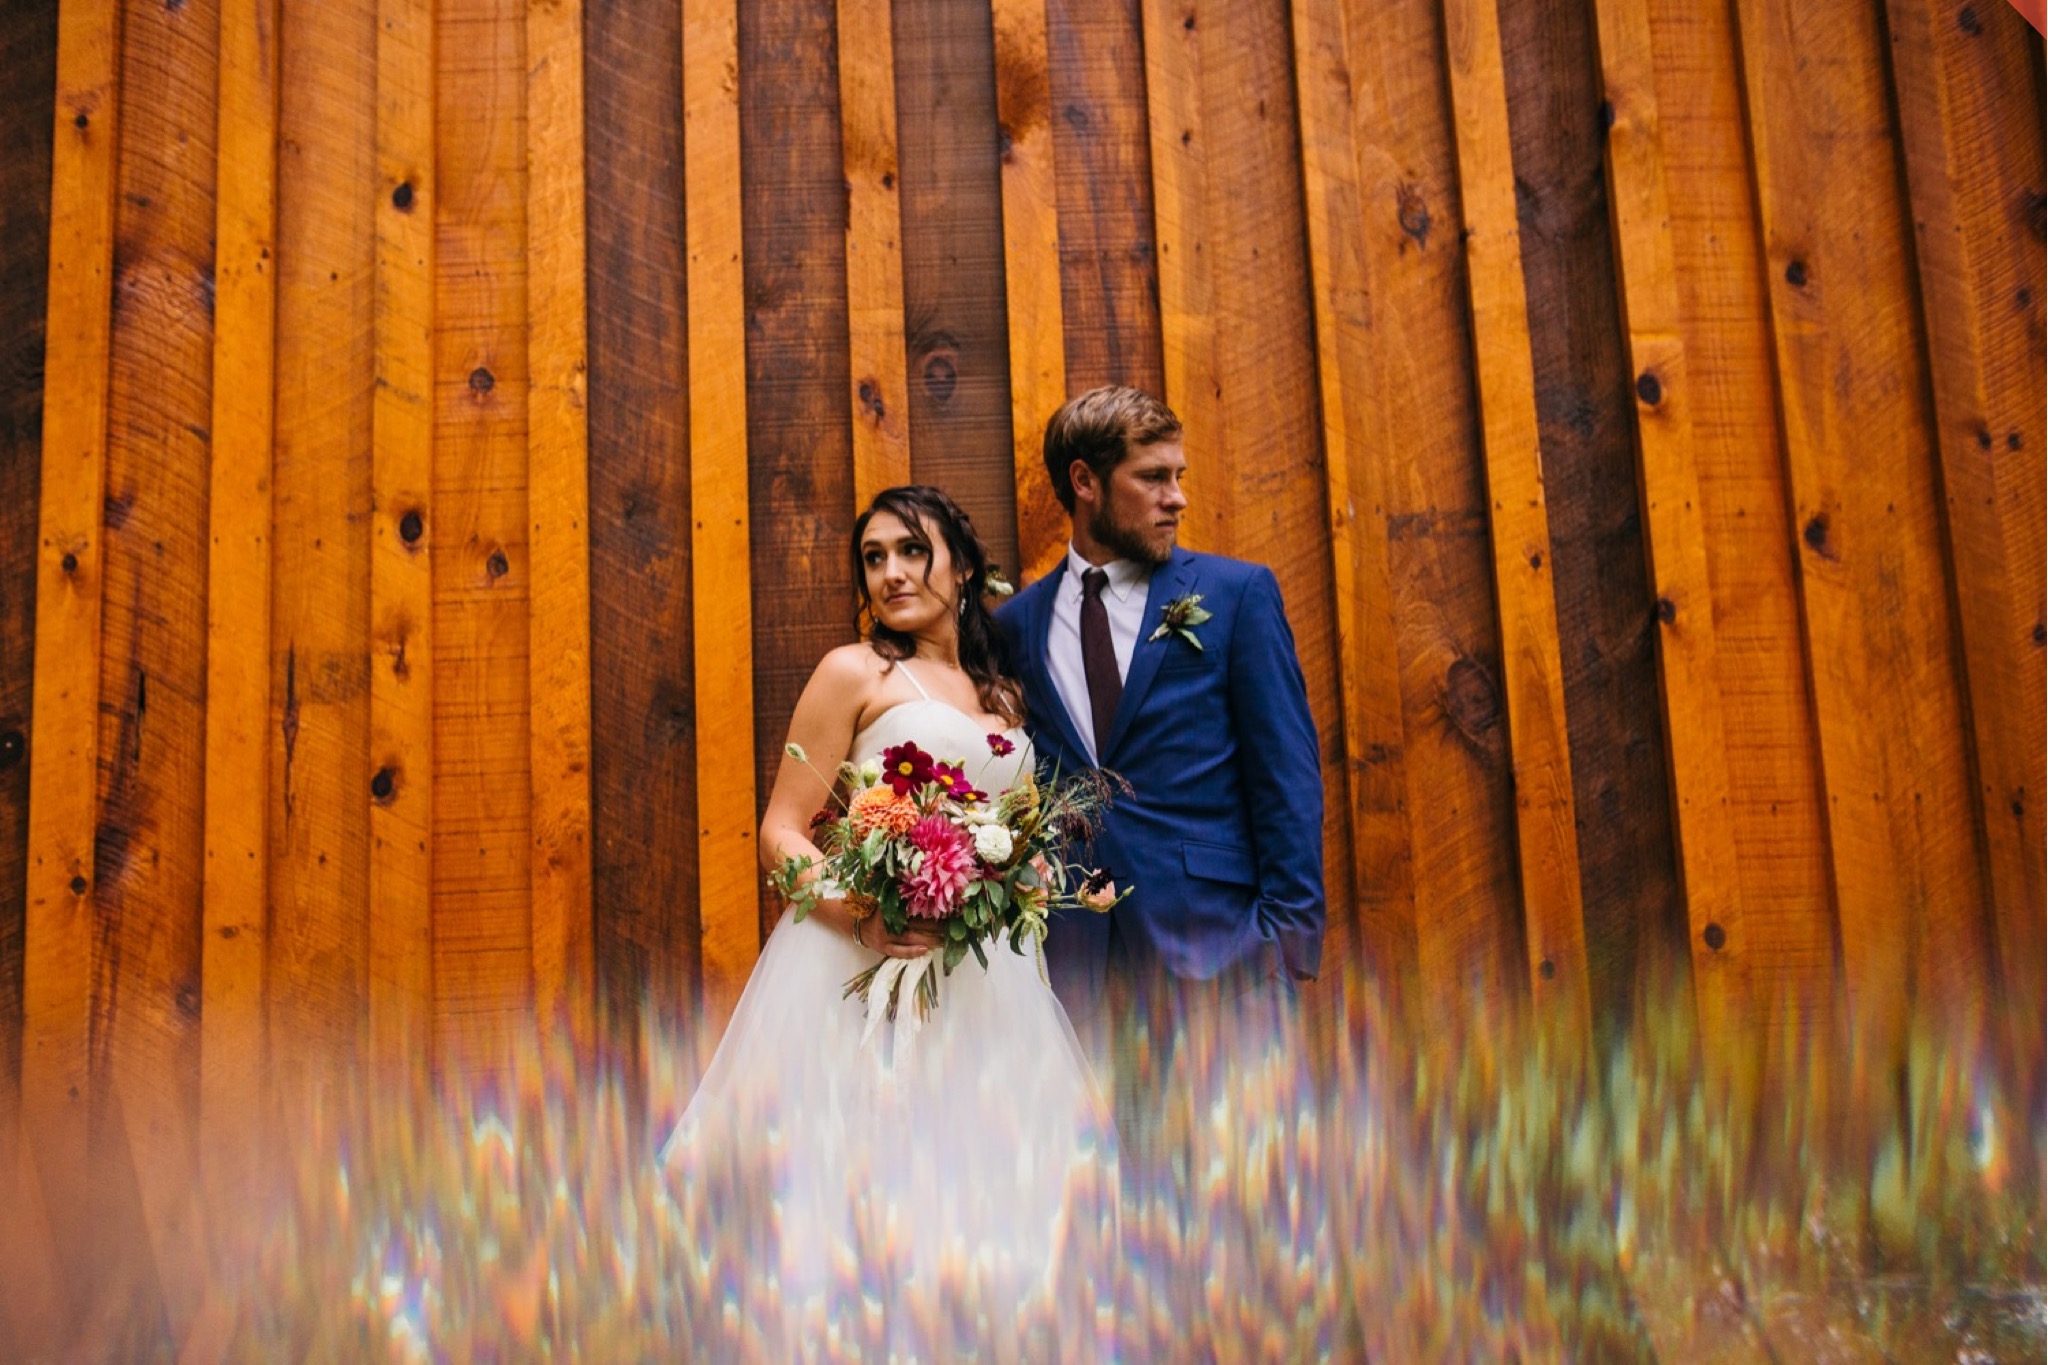 The bride and groom stand together looking in opposite directions against a wood paneled wall.